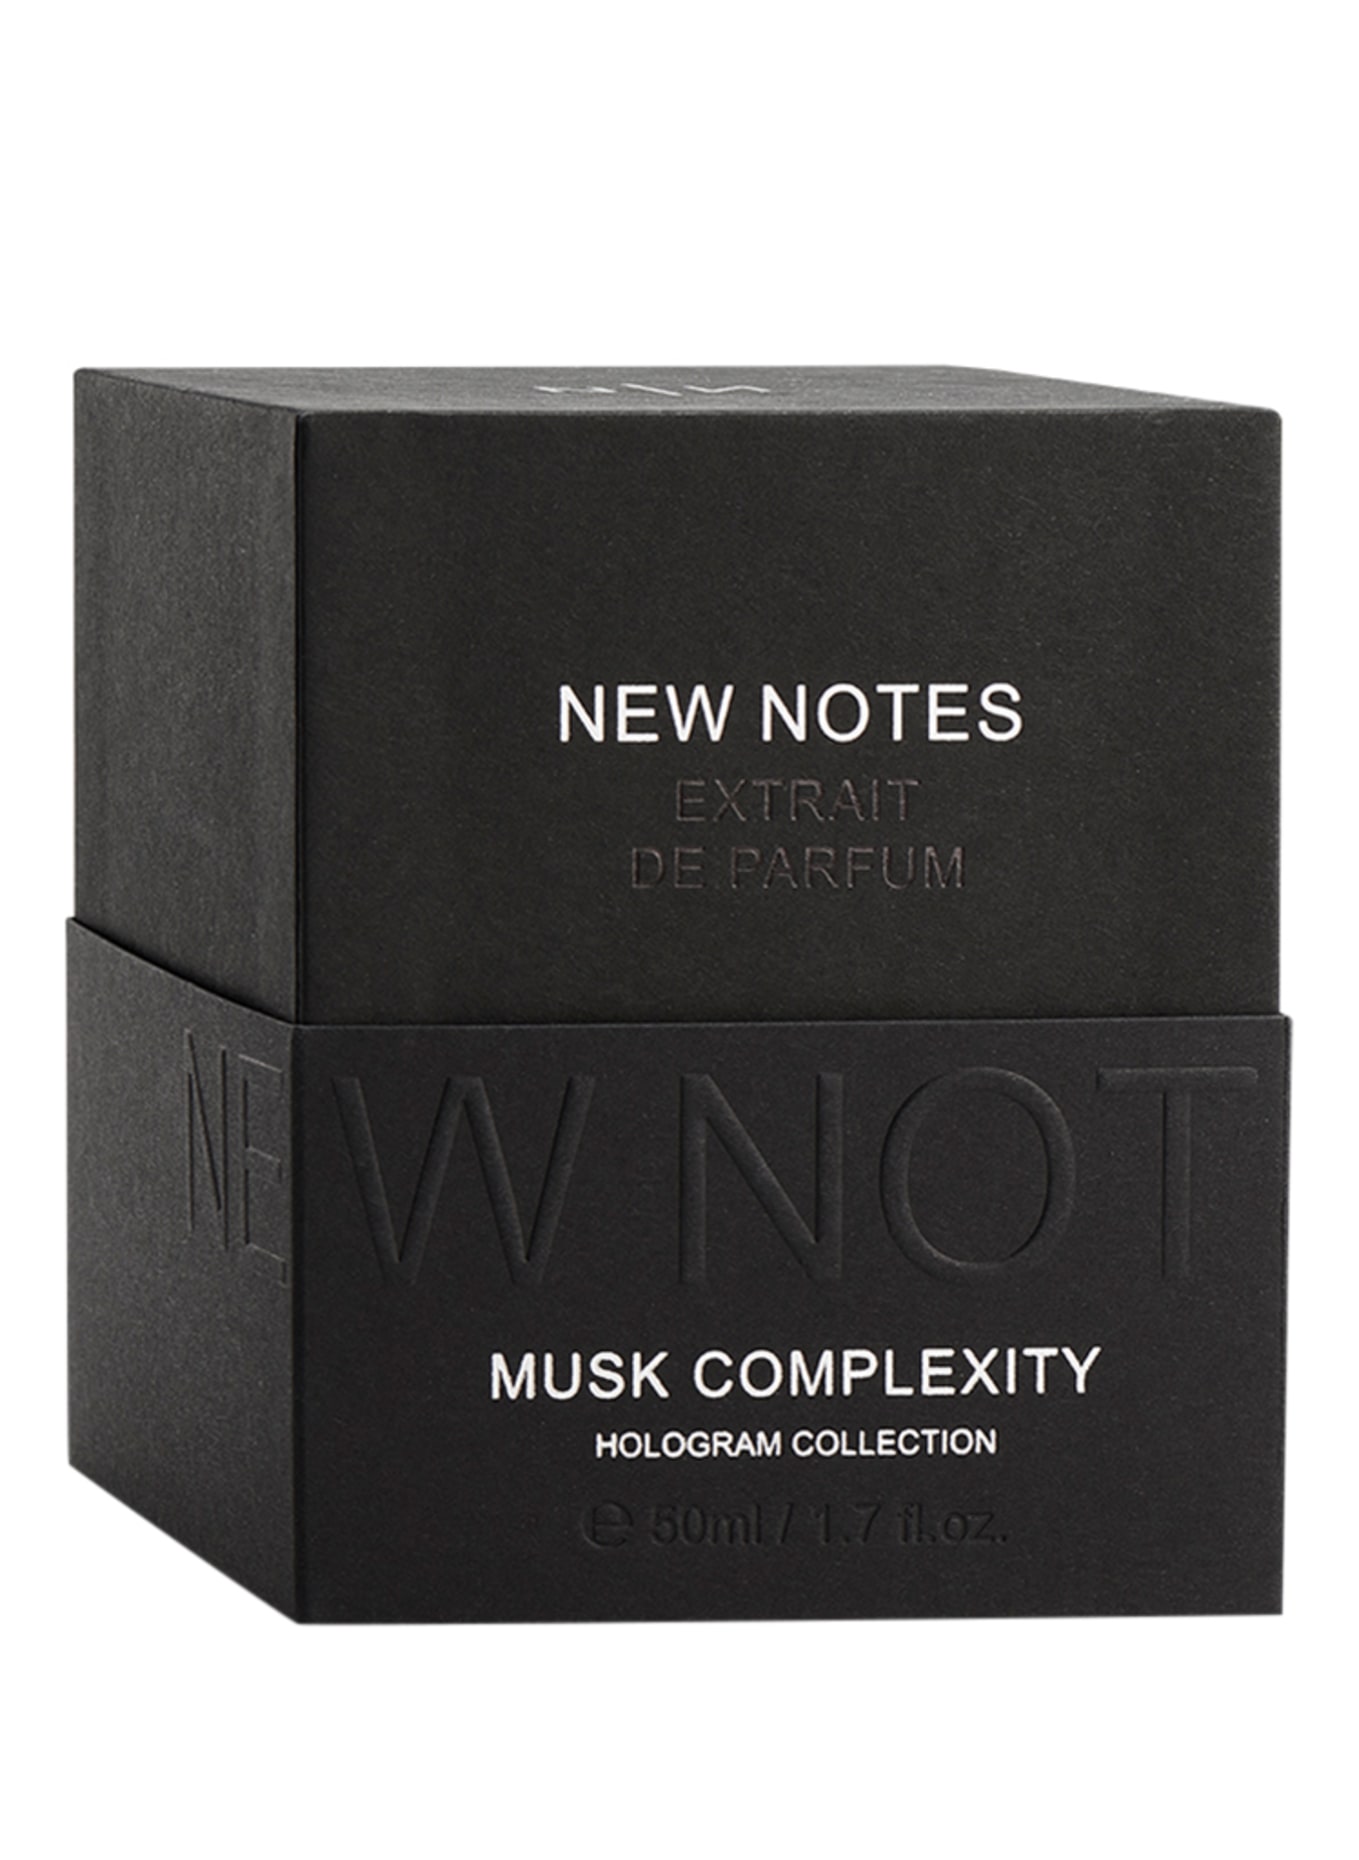 NEW NOTES MUSK COMPLEXITY (Obrazek 2)